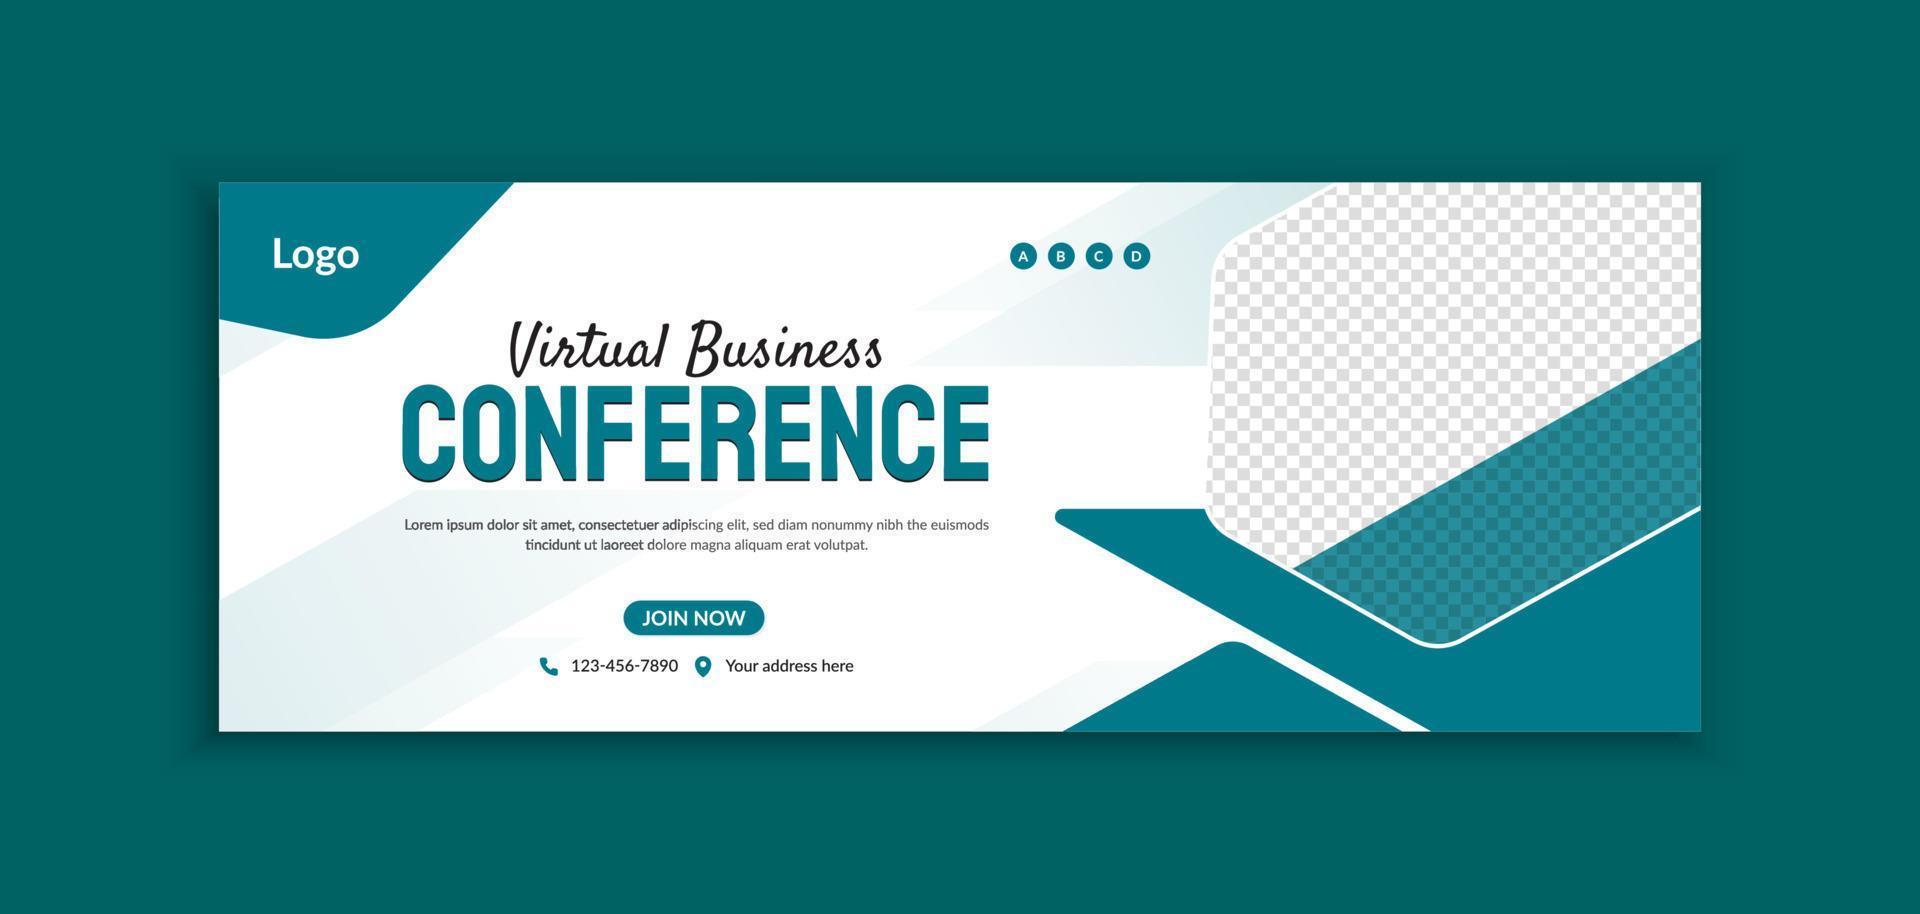 Unique webinar business marketing social media cover and web banner template vector